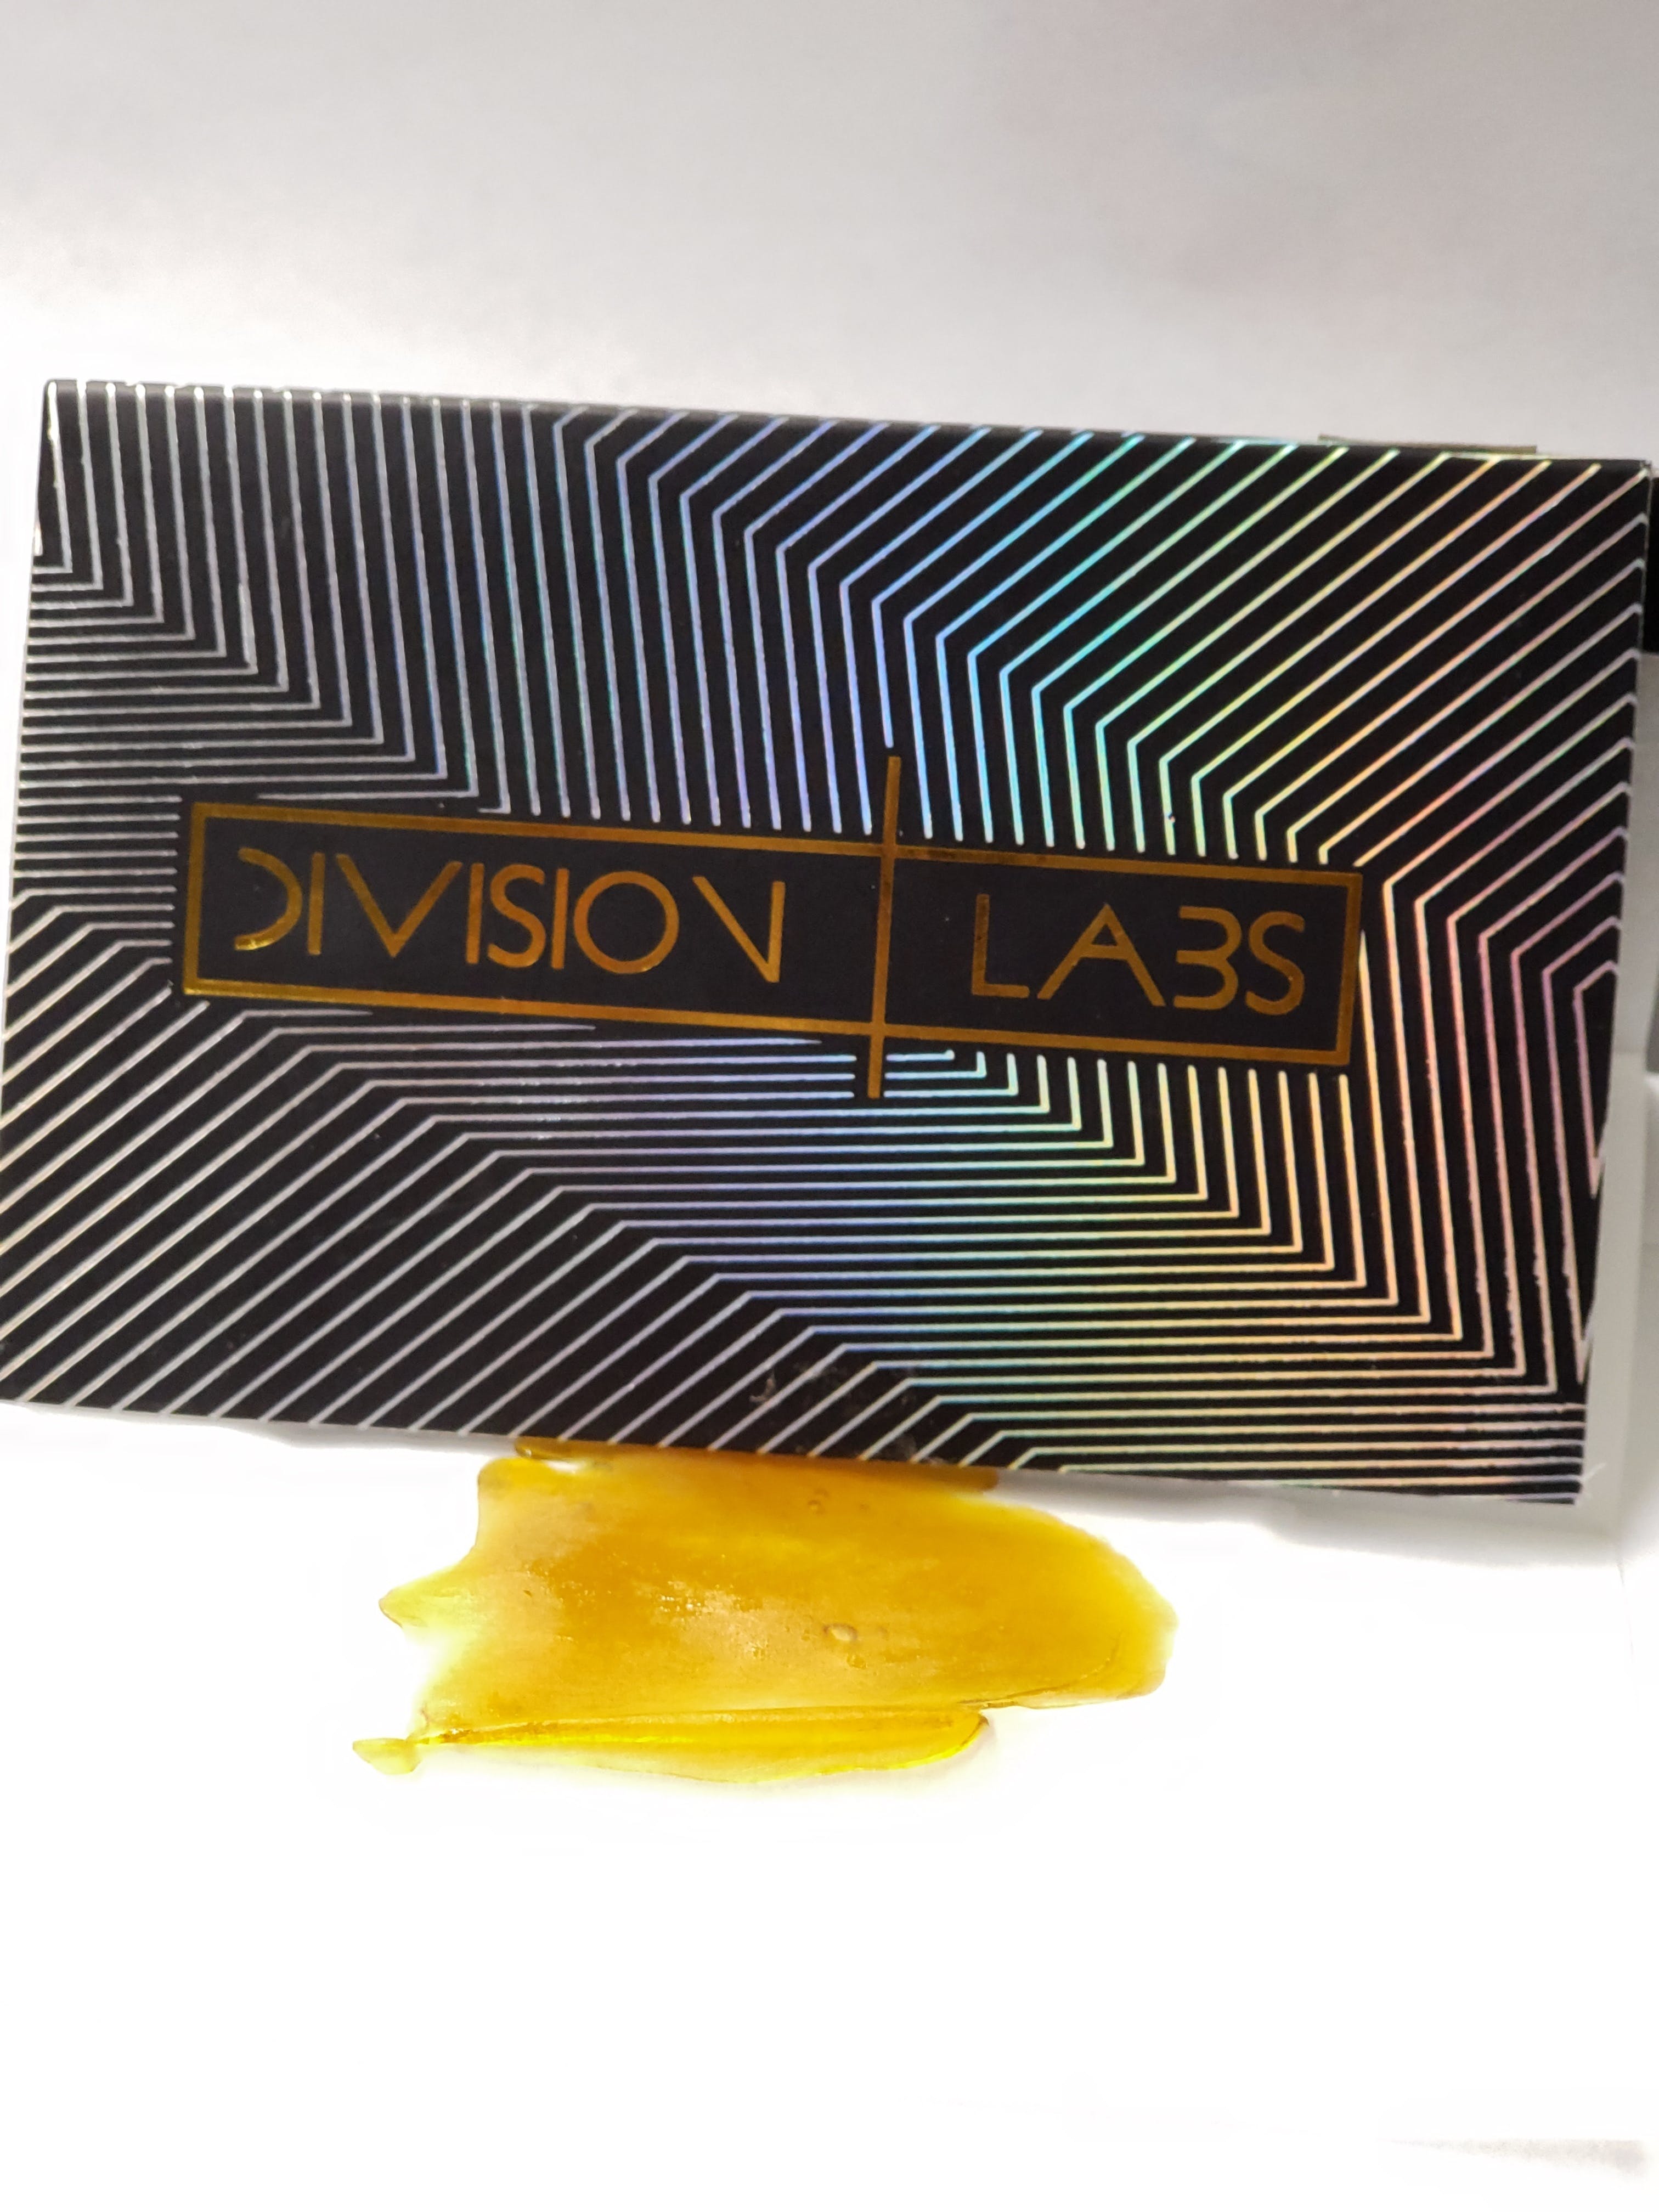 wax-division-labs-pineapple-express-1g-2440